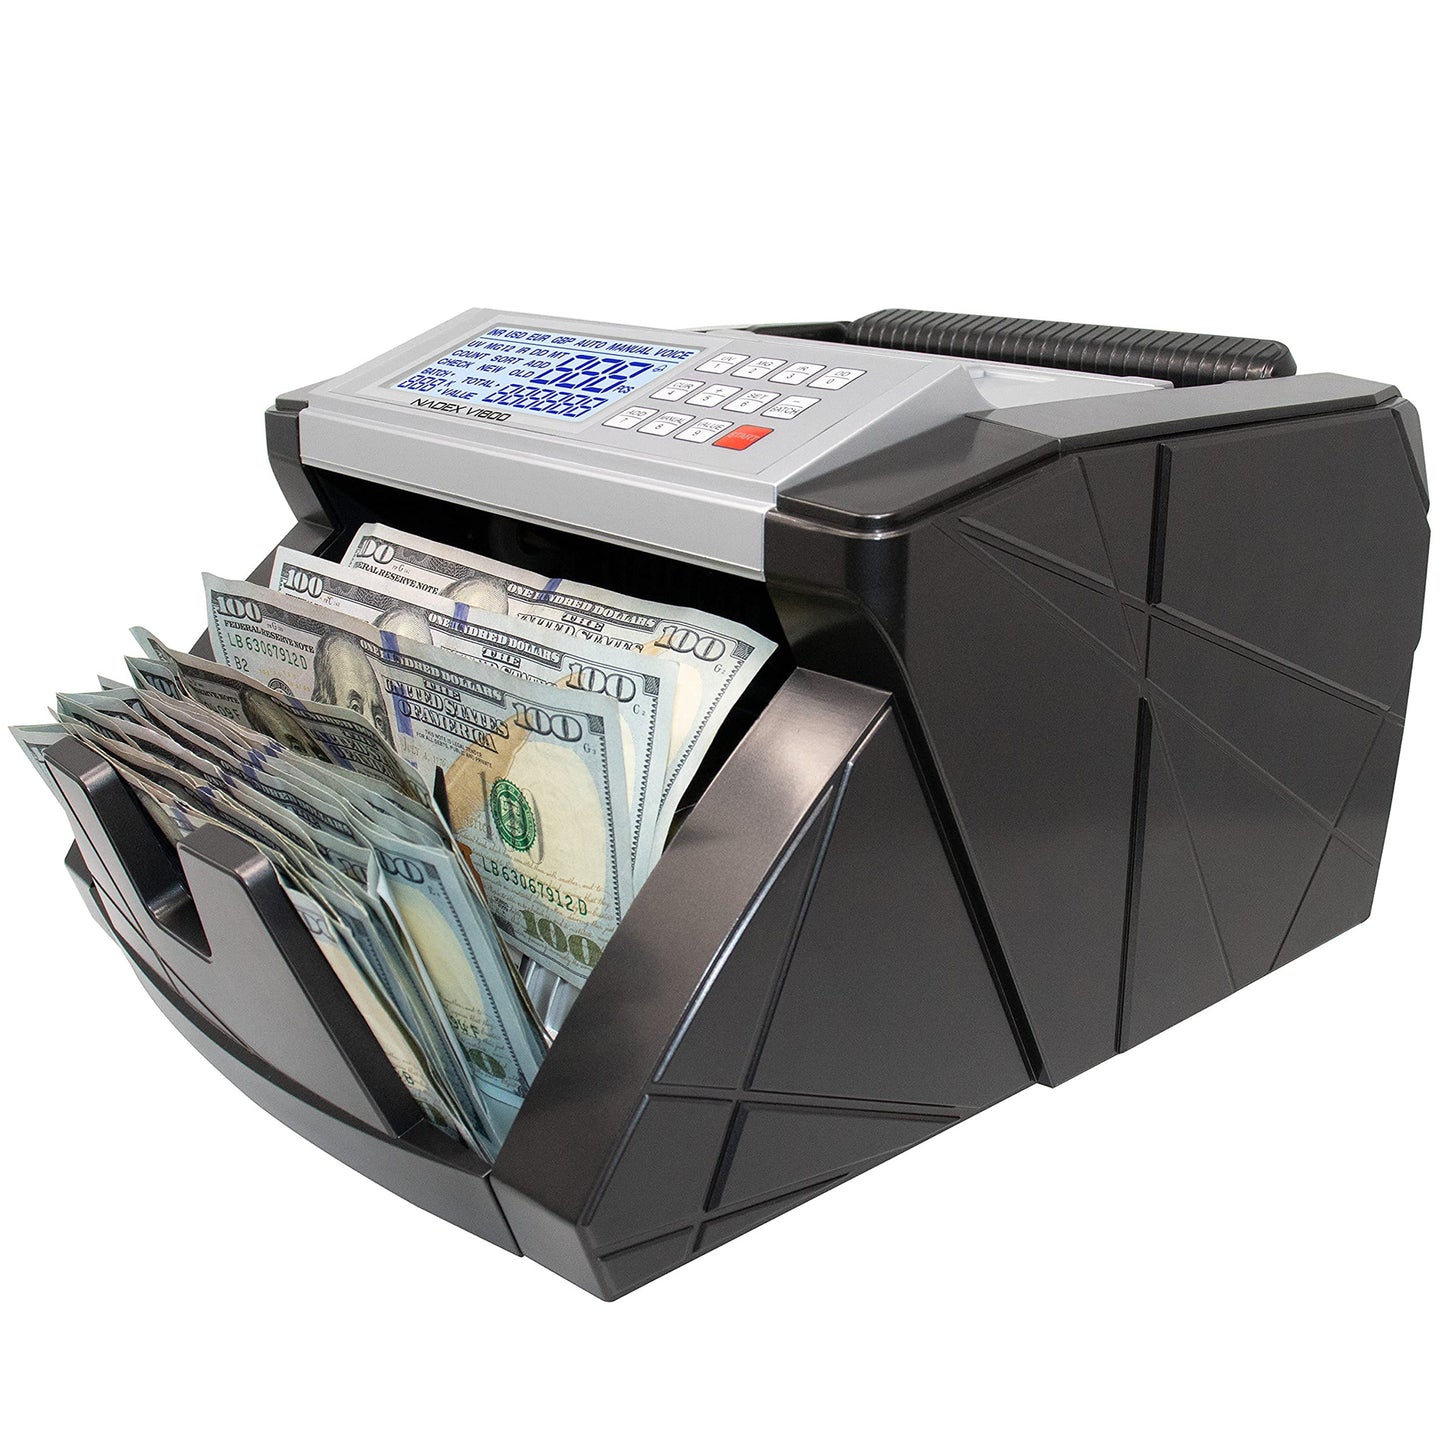 Nadex V1800 Money Counter High Speed Bill Counter and Counterfeit Detector